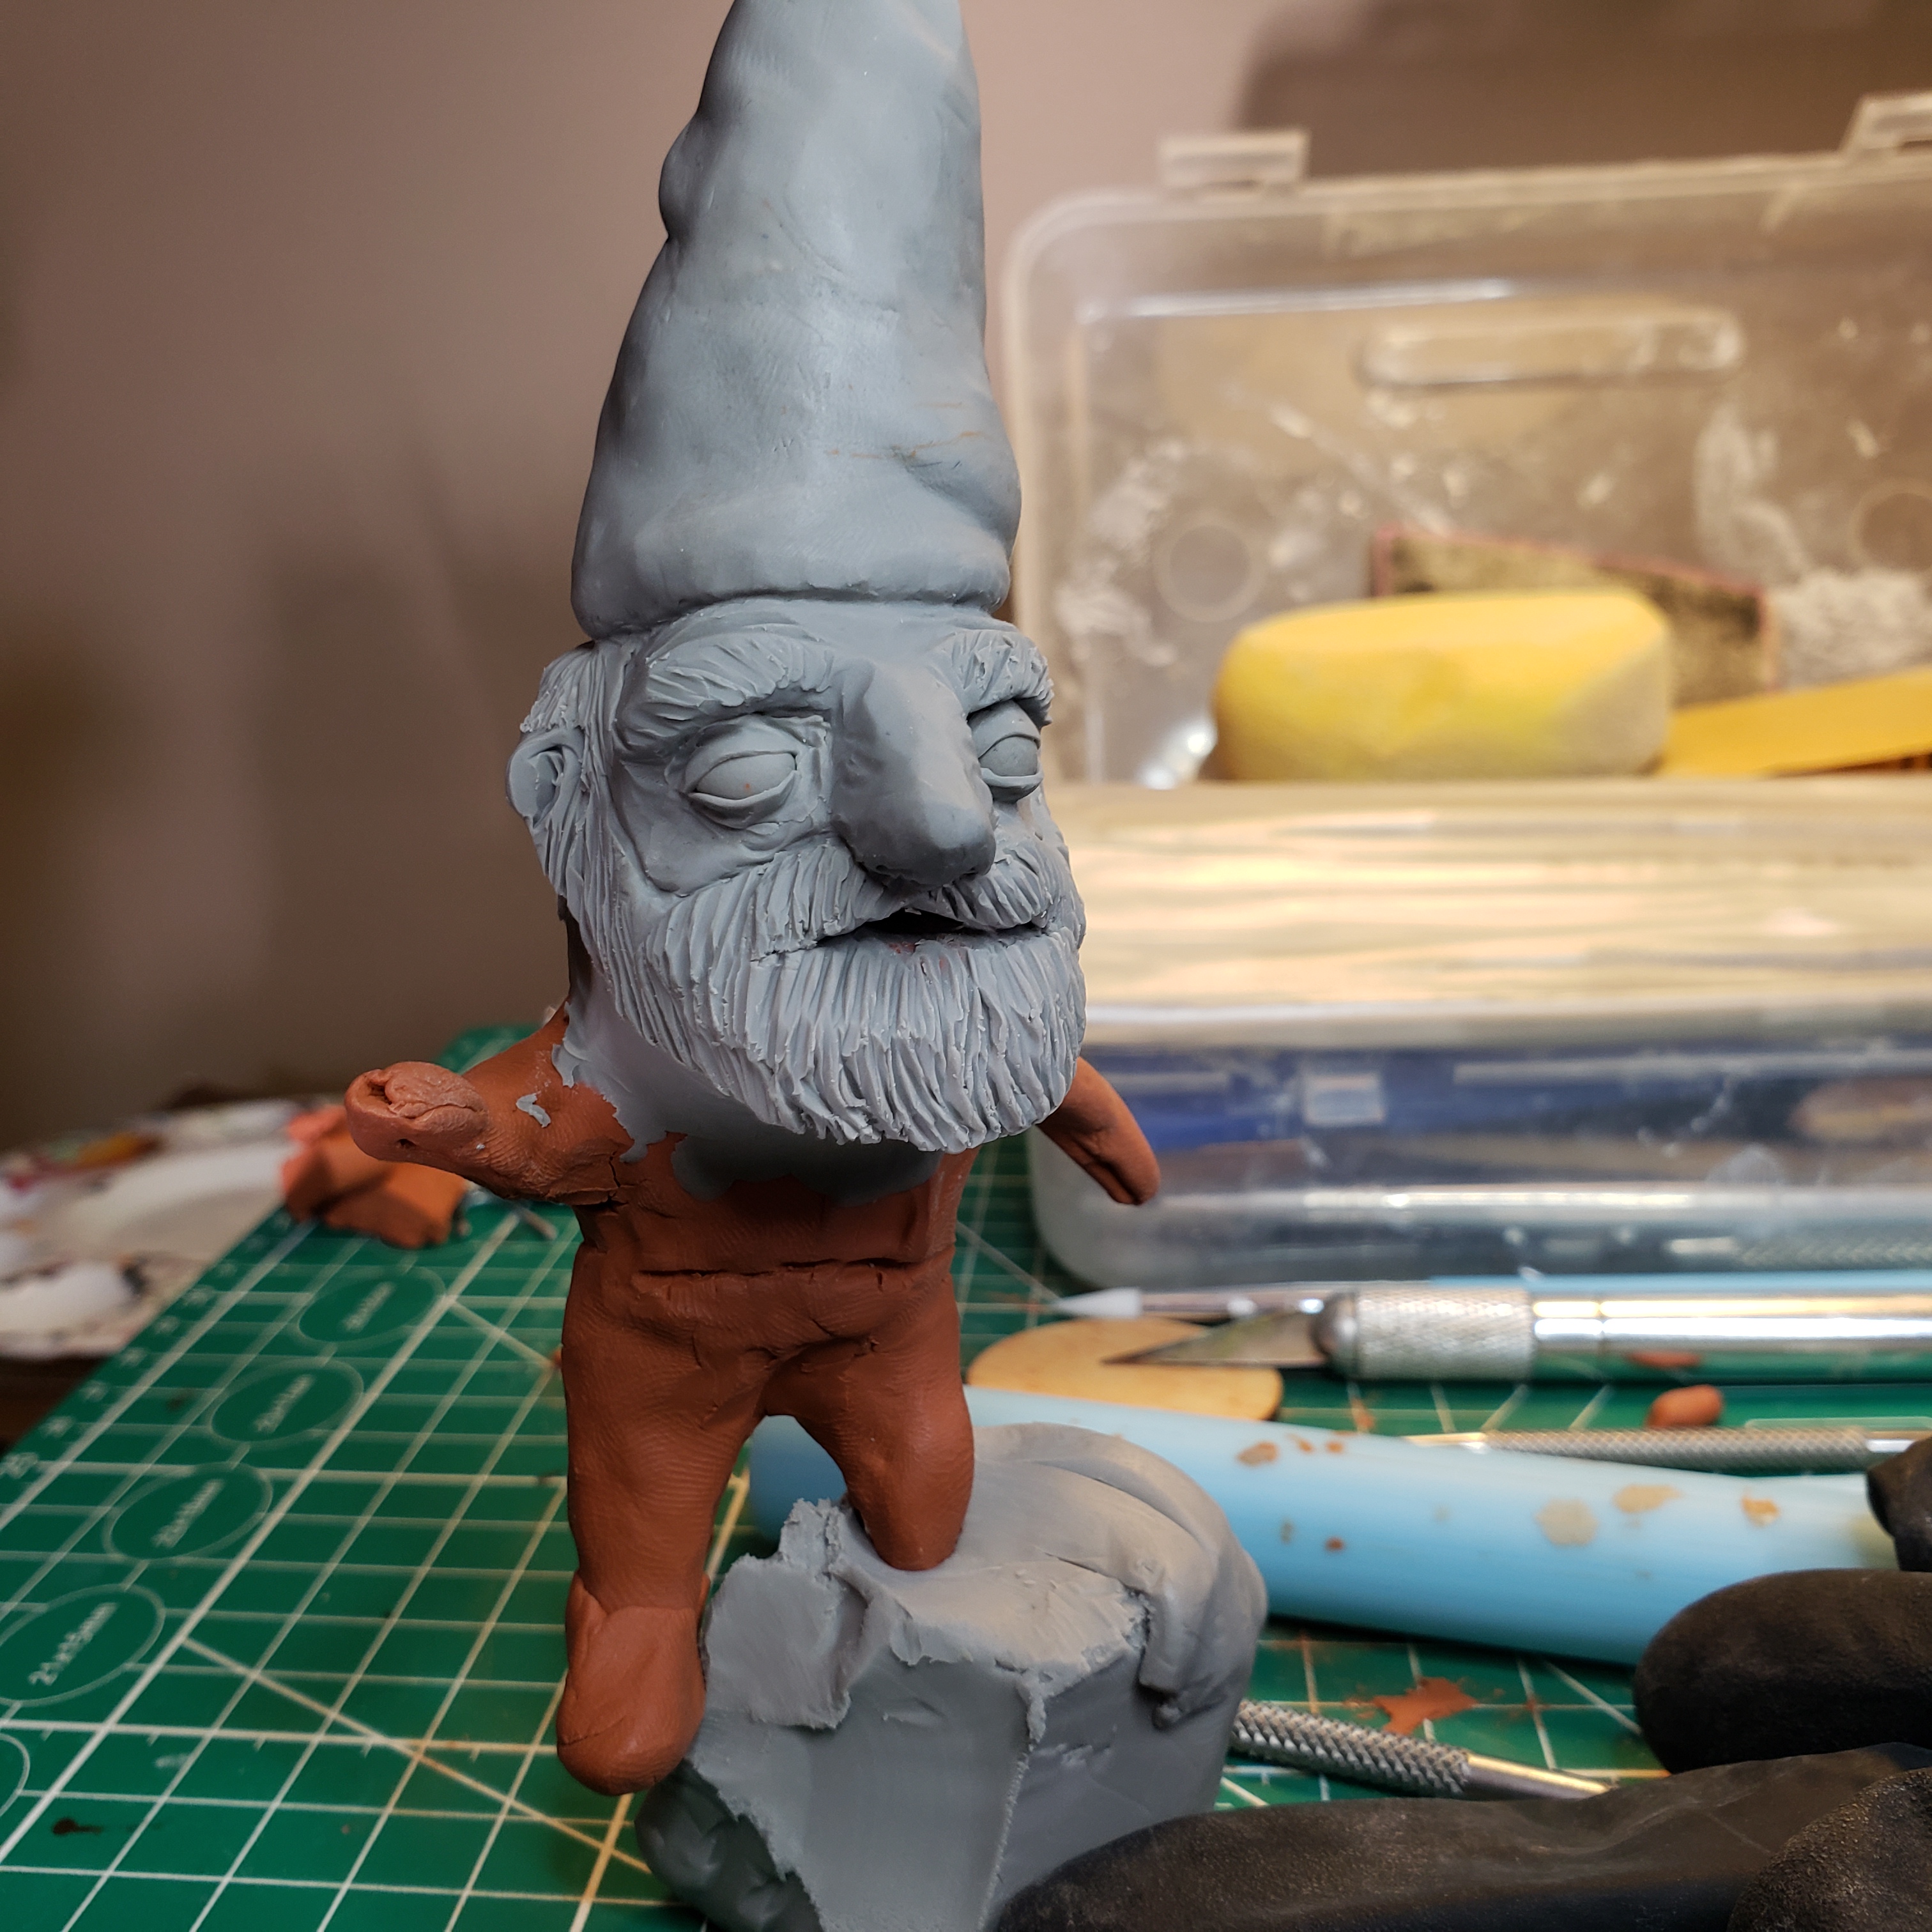 Just the head of the gnome on the armature